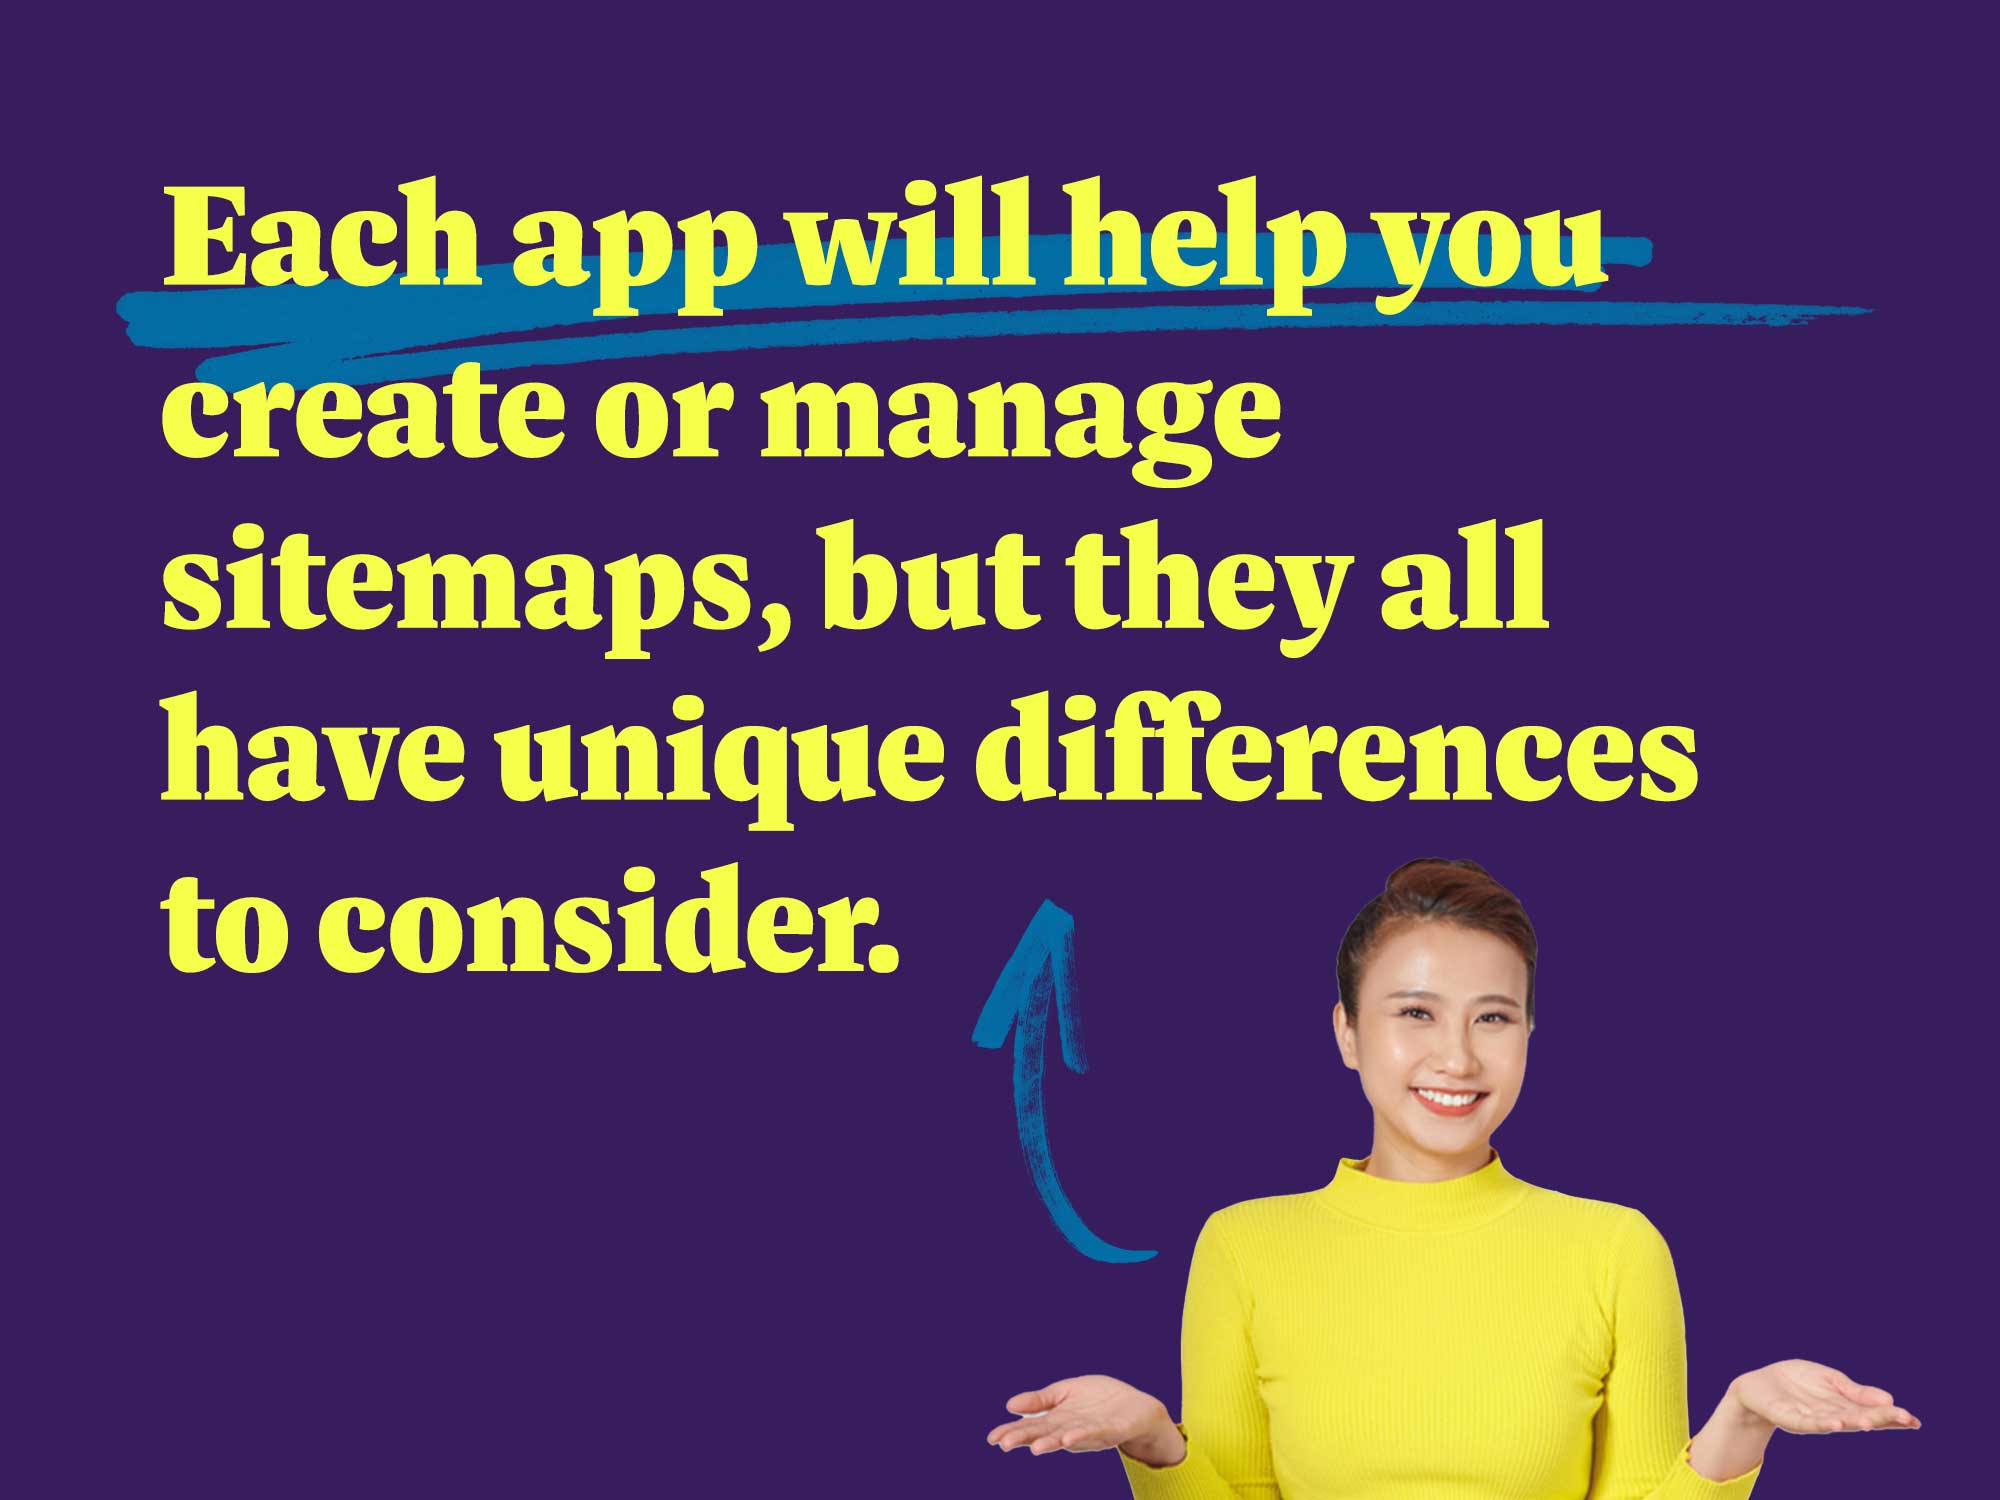 Each app will help you create or manage sitemaps, but they all have unique differences to consider.